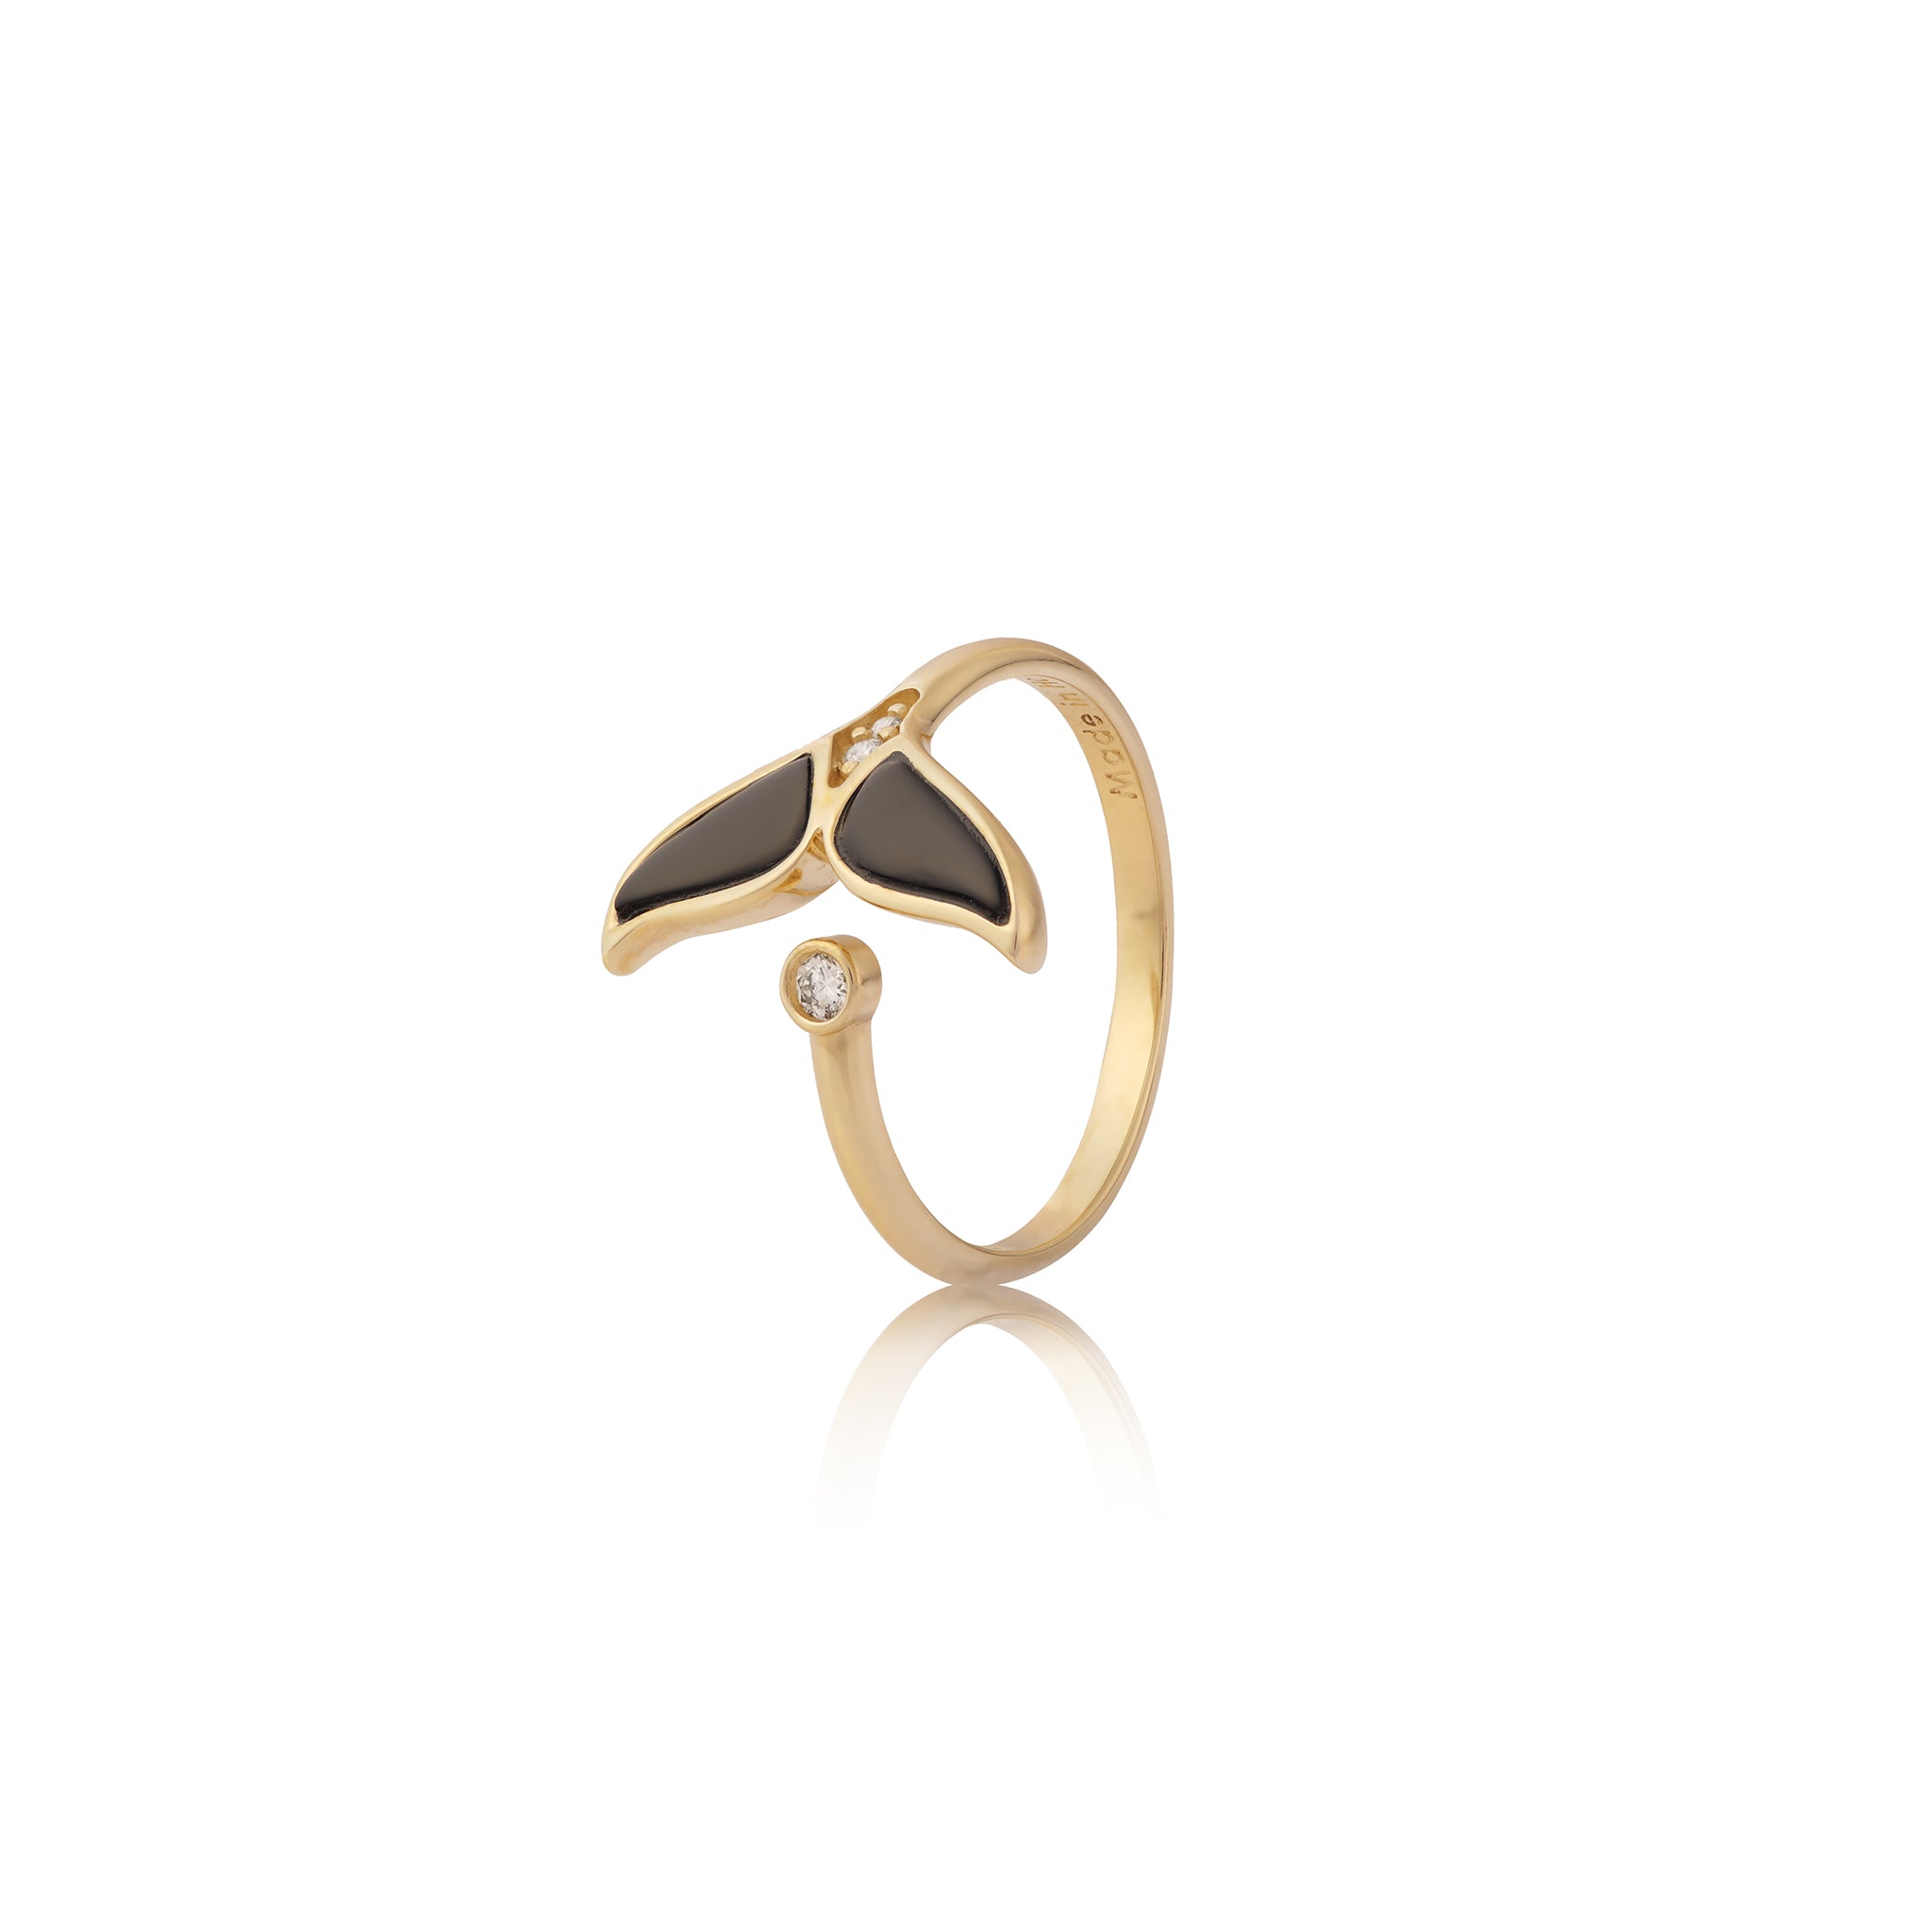 Sealife Whale Tail Black Coral Ring in Gold with Diamonds - 15mm